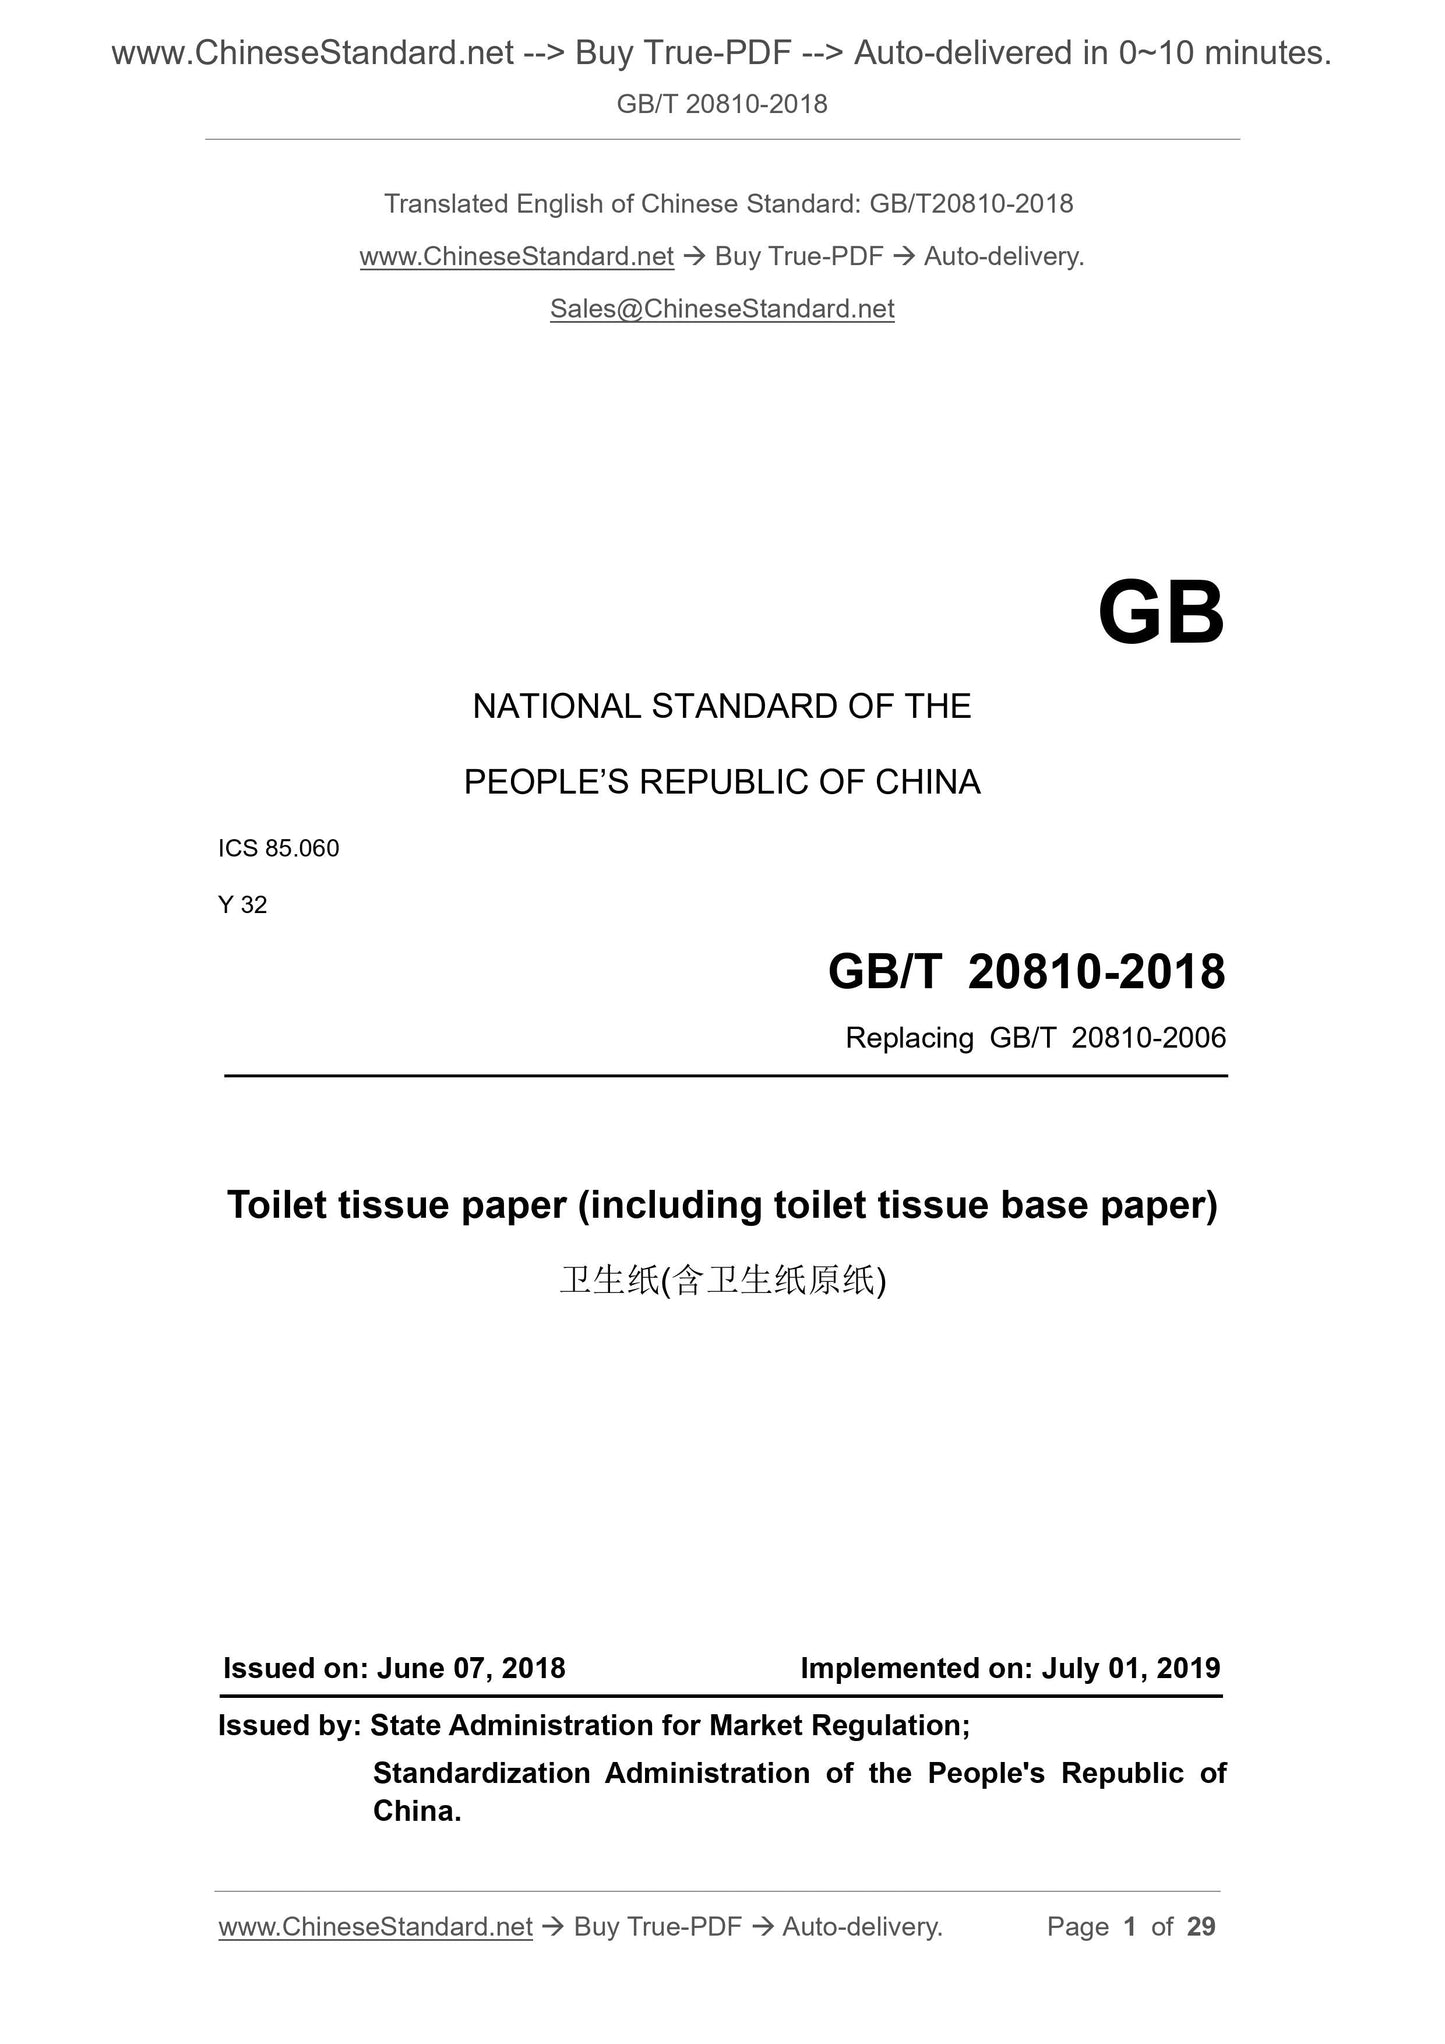 GB/T 20810-2018 Page 1